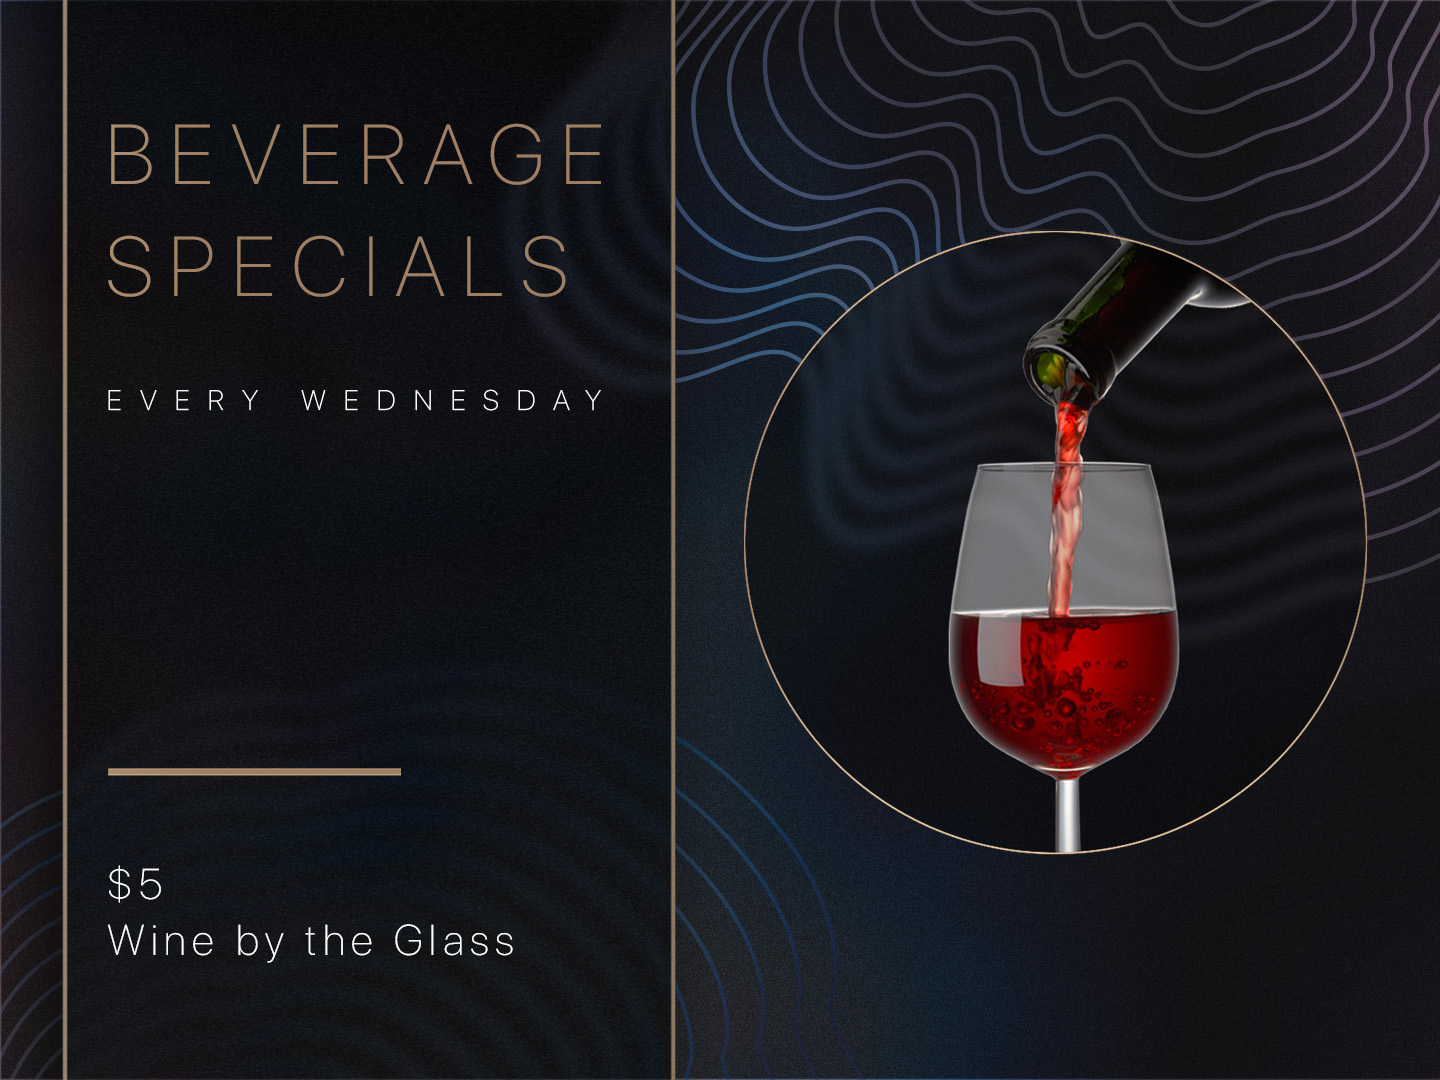 Beverage Specials. Every Wednesday. $5 Wine by the glass